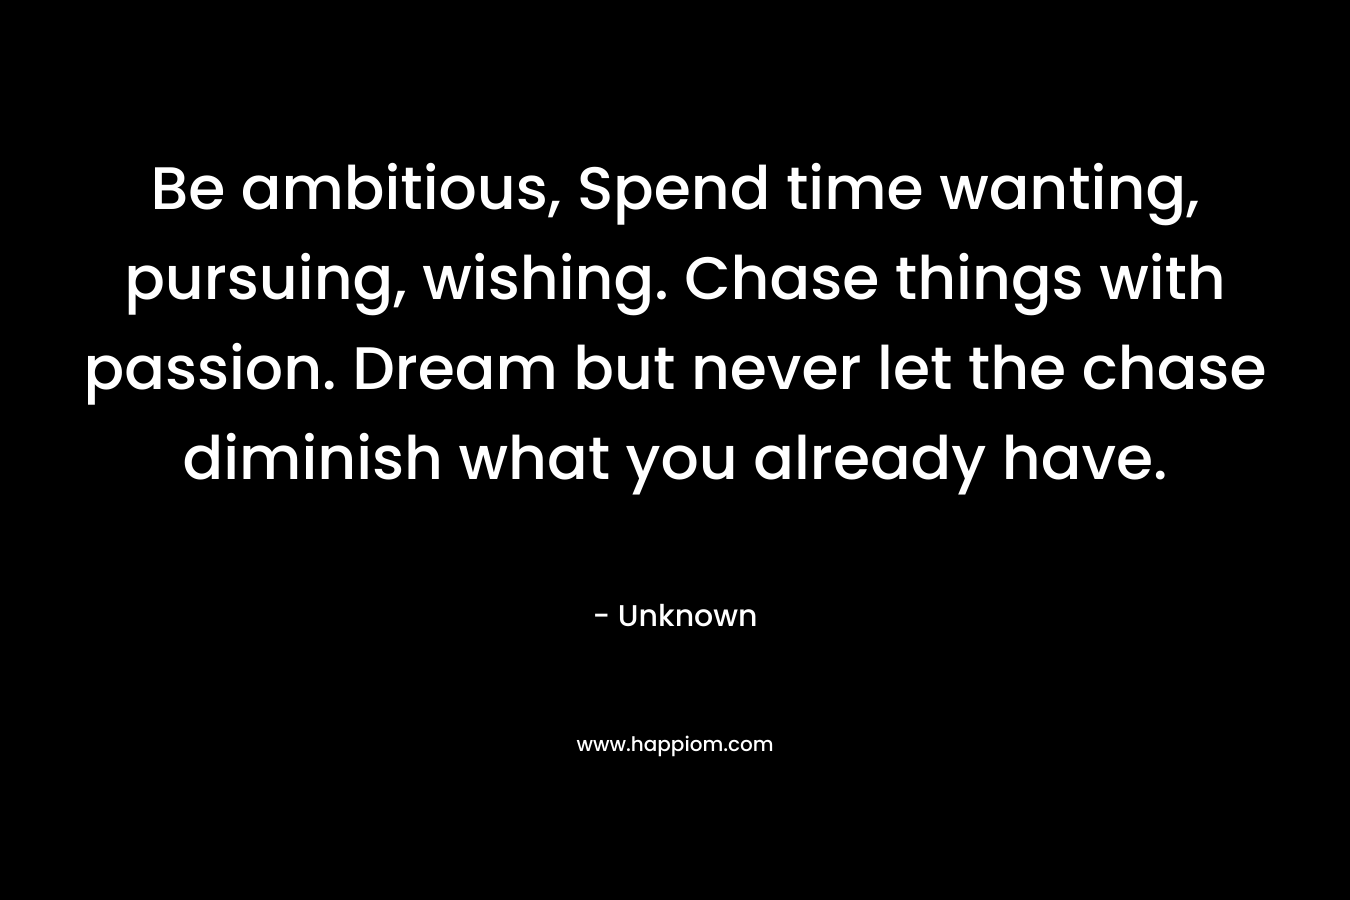 Be ambitious, Spend time wanting, pursuing, wishing. Chase things with passion. Dream but never let the chase diminish what you already have.